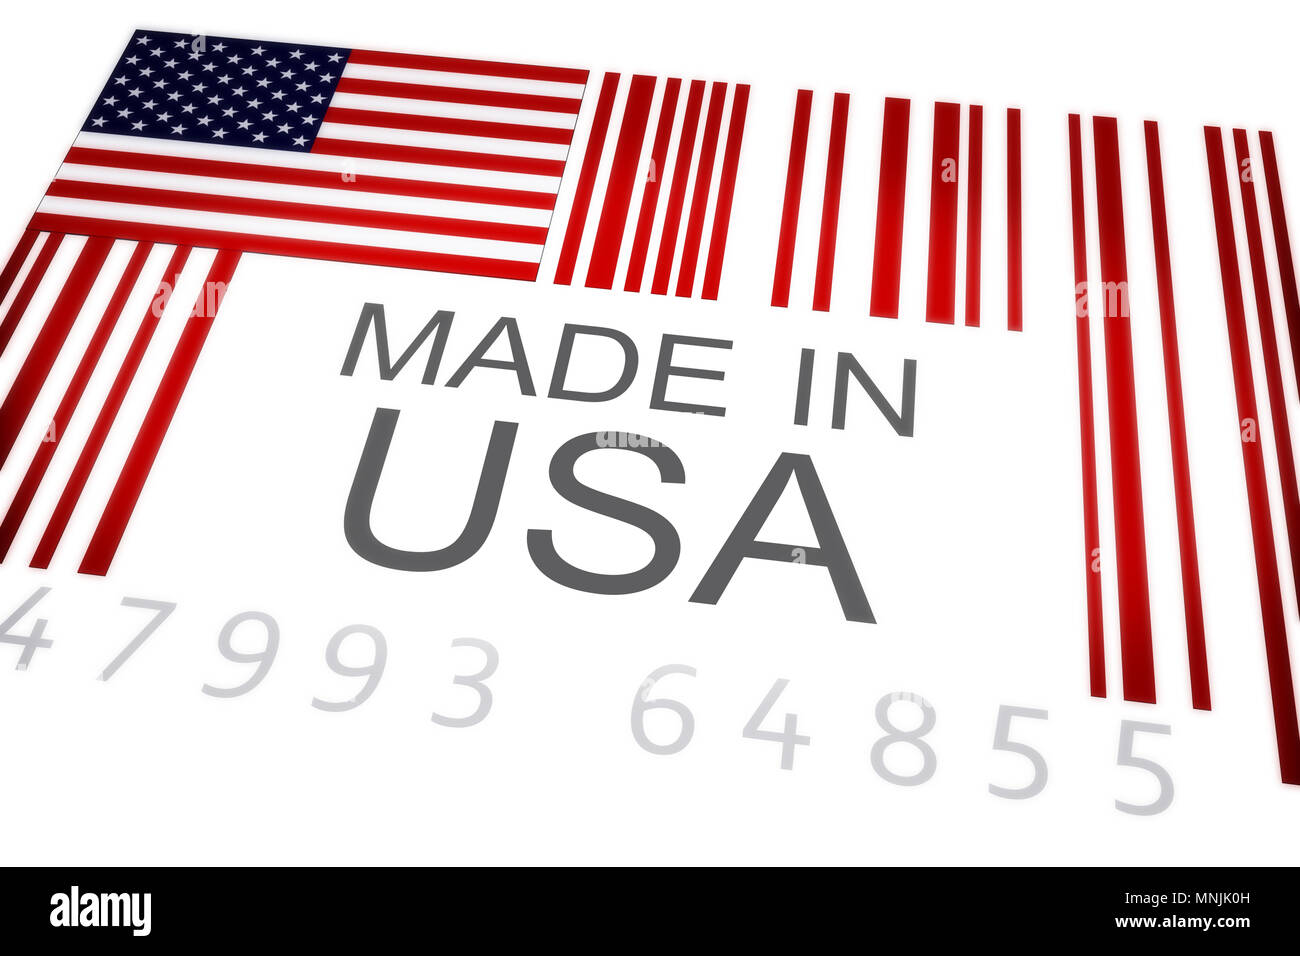 Product bar code symbolizing the massive amounts of goods imported and exported from the United States , made in the usa, barcode Stock Photo